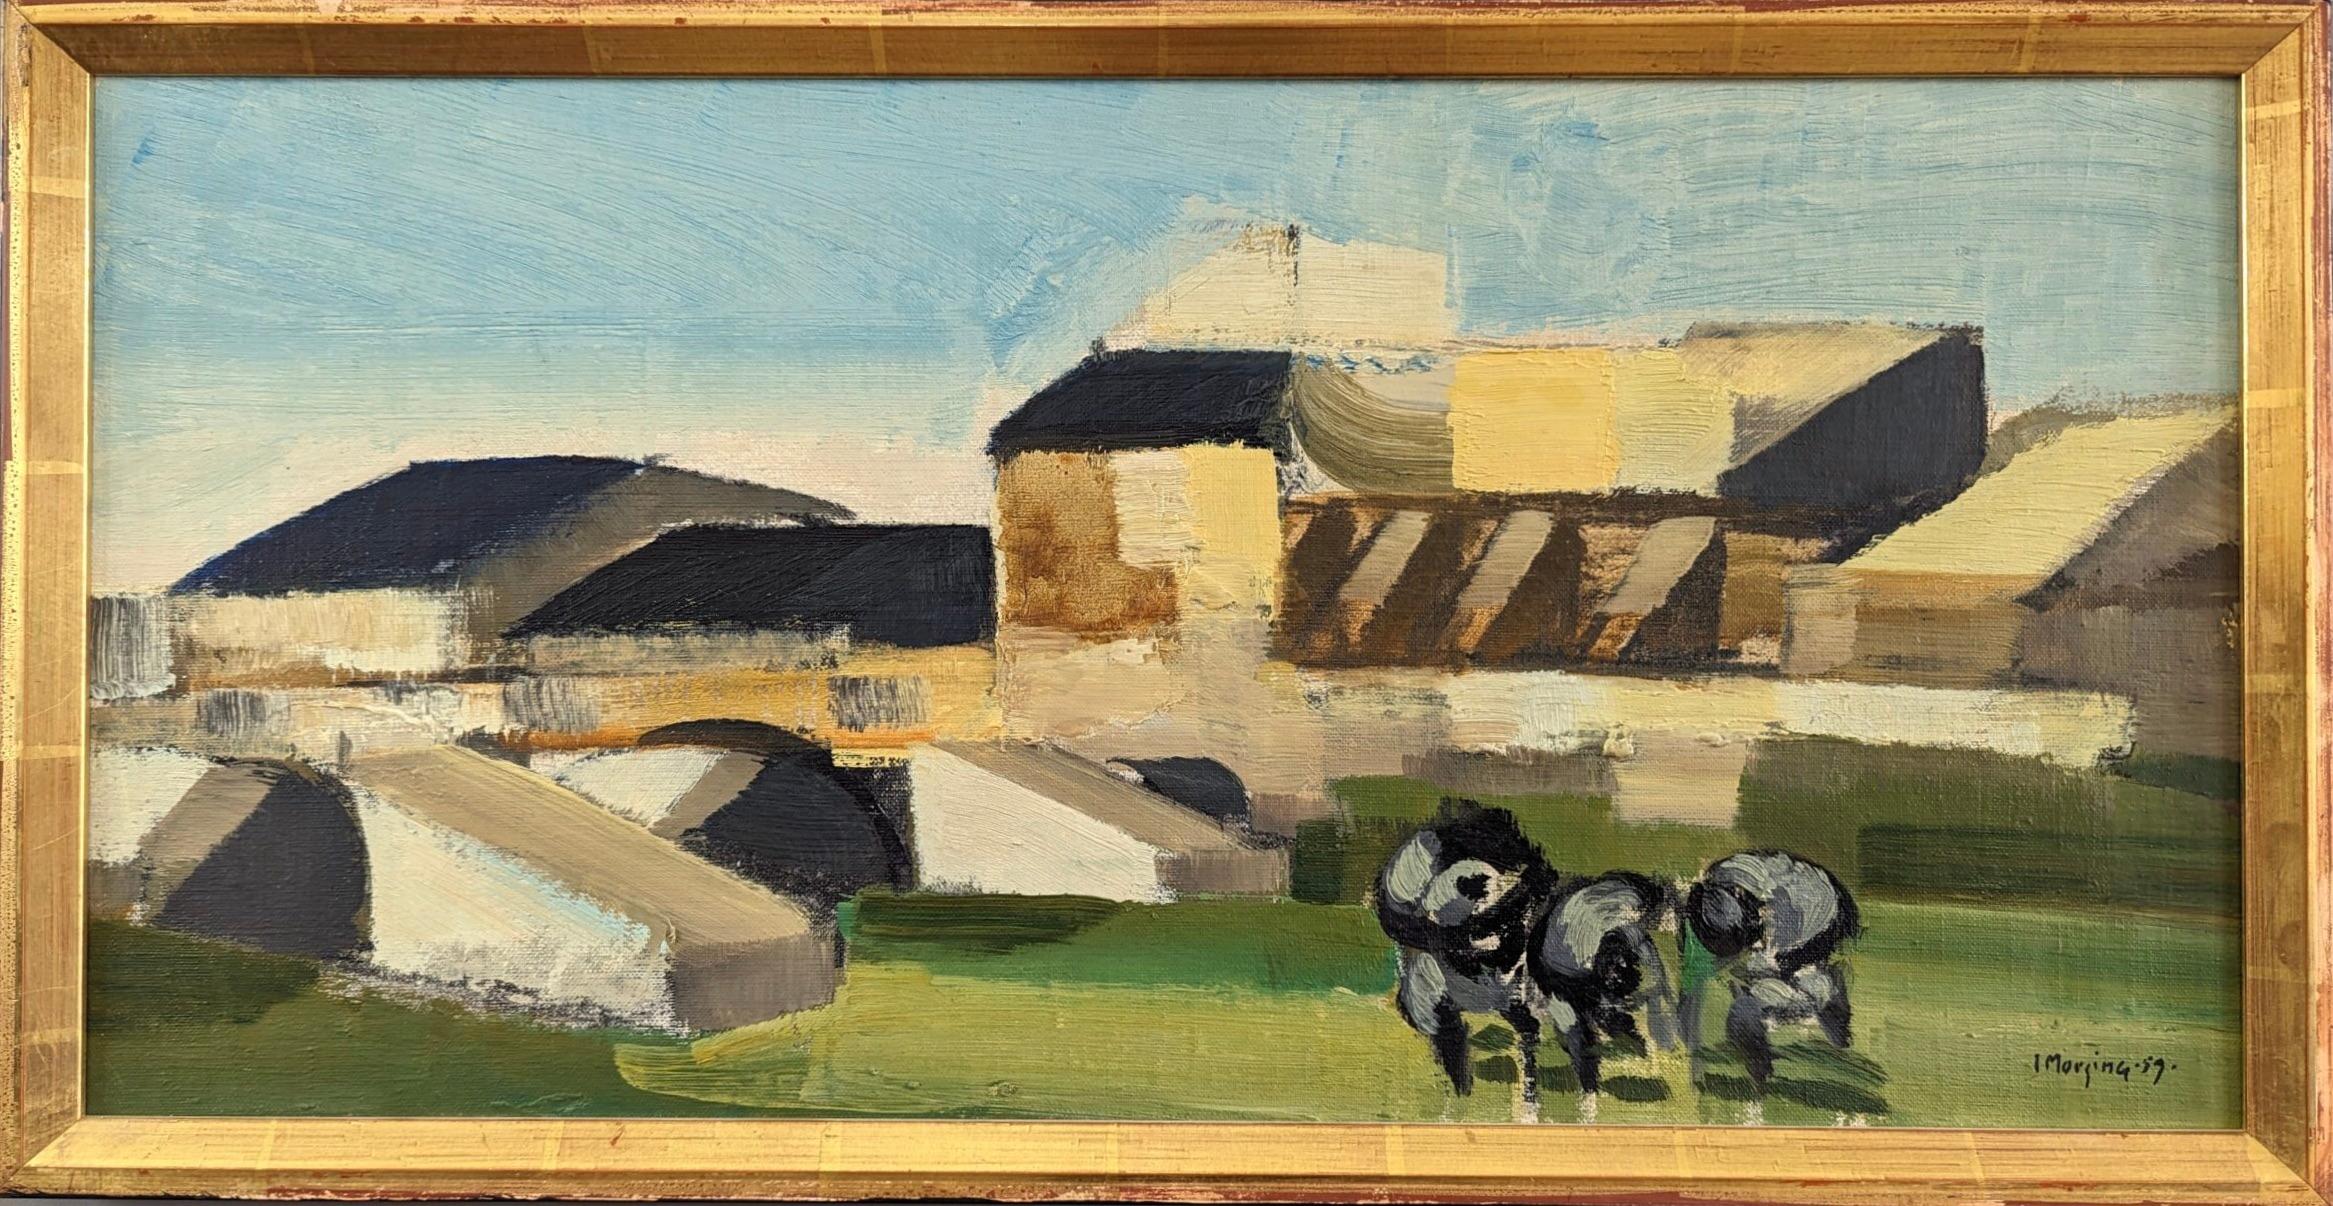 EXPLORE
Size: 33 x 63.5cm (including frame)
Oil on Board

A brilliantly executed semi-abstract city landscape oil composition, painted in 1959 by the established Swedish artist Ivar Morsing (1919-2009), whose works have been exhibited in public